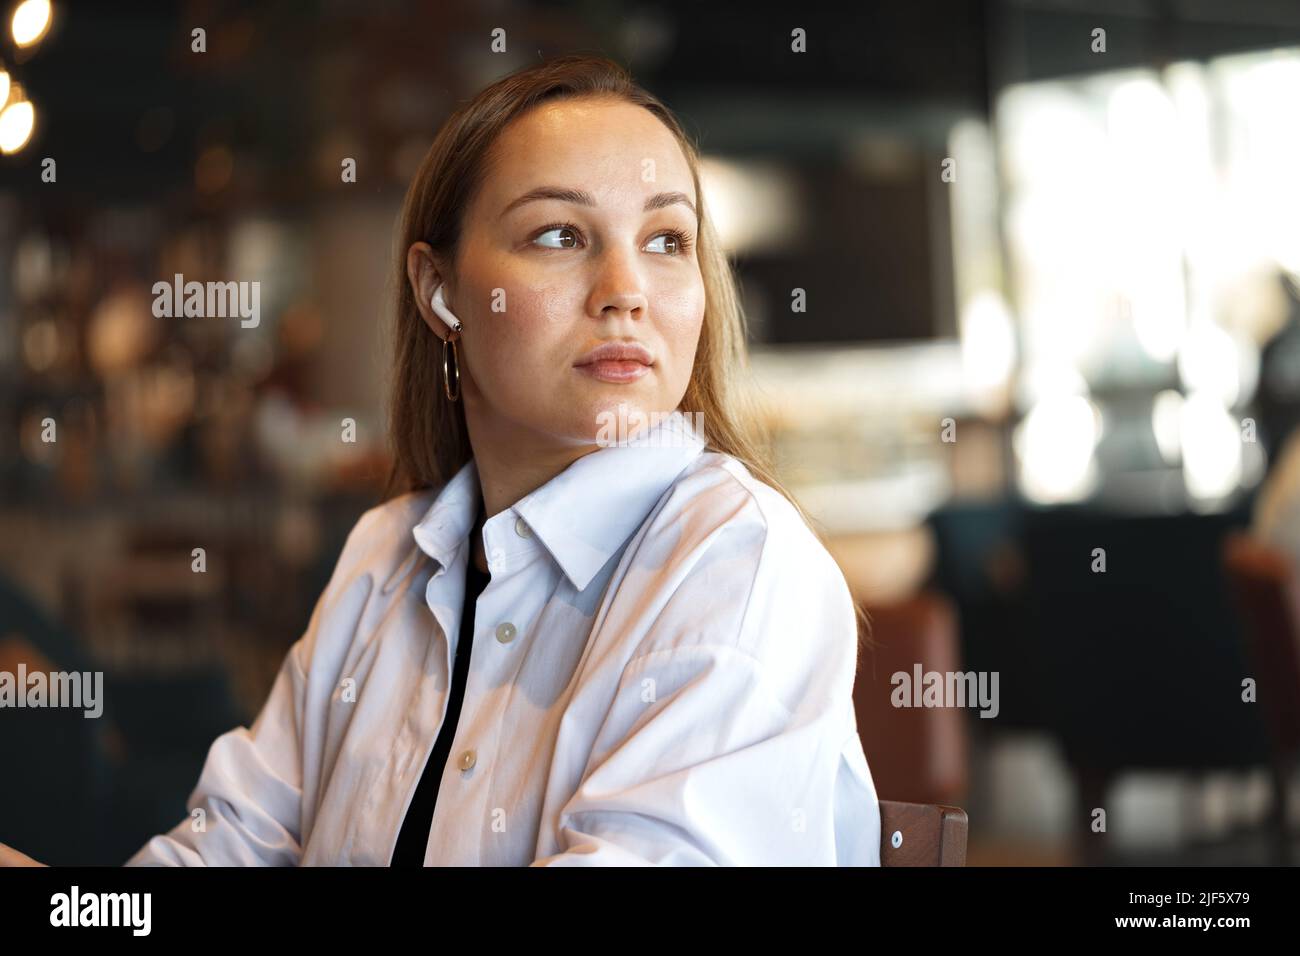 Portrait of a blonde woman in white shirt sitting in cafe Stock Photo